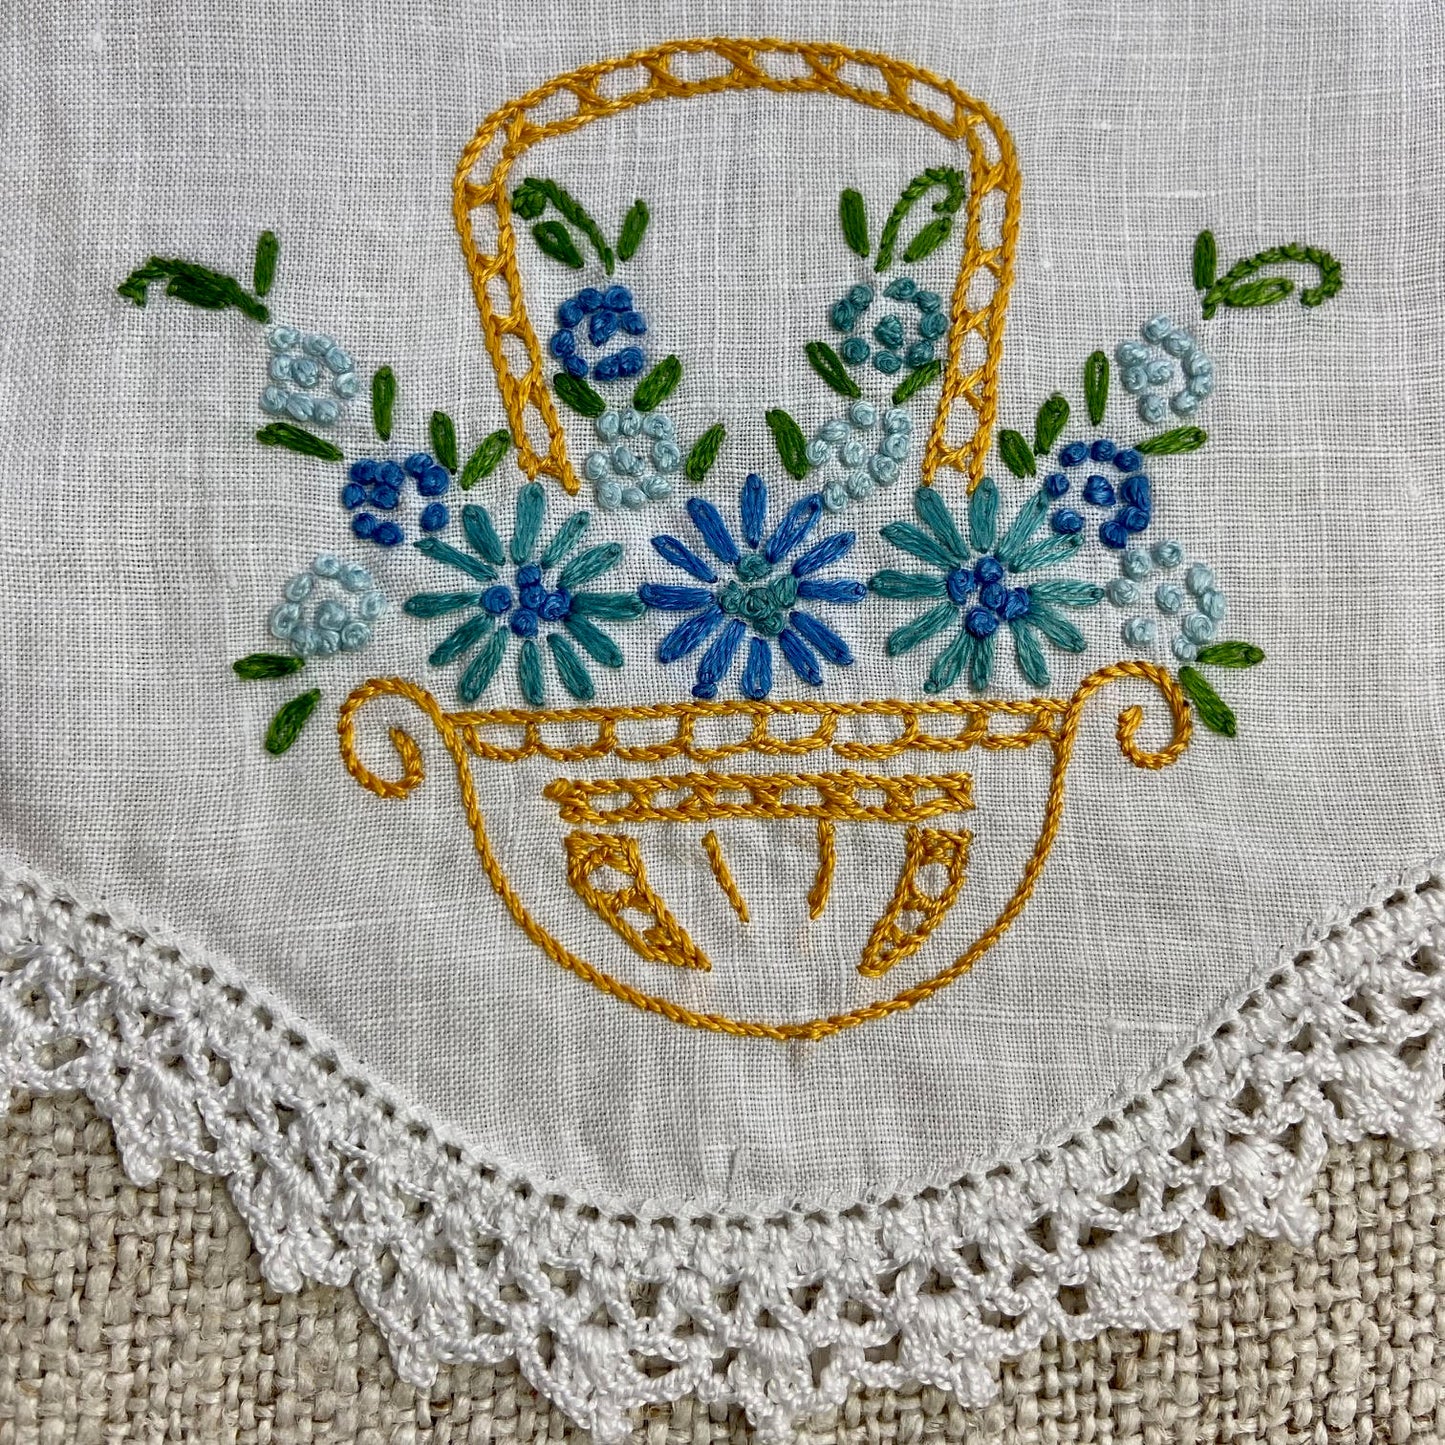 Two Doilies - Item 23551(A)